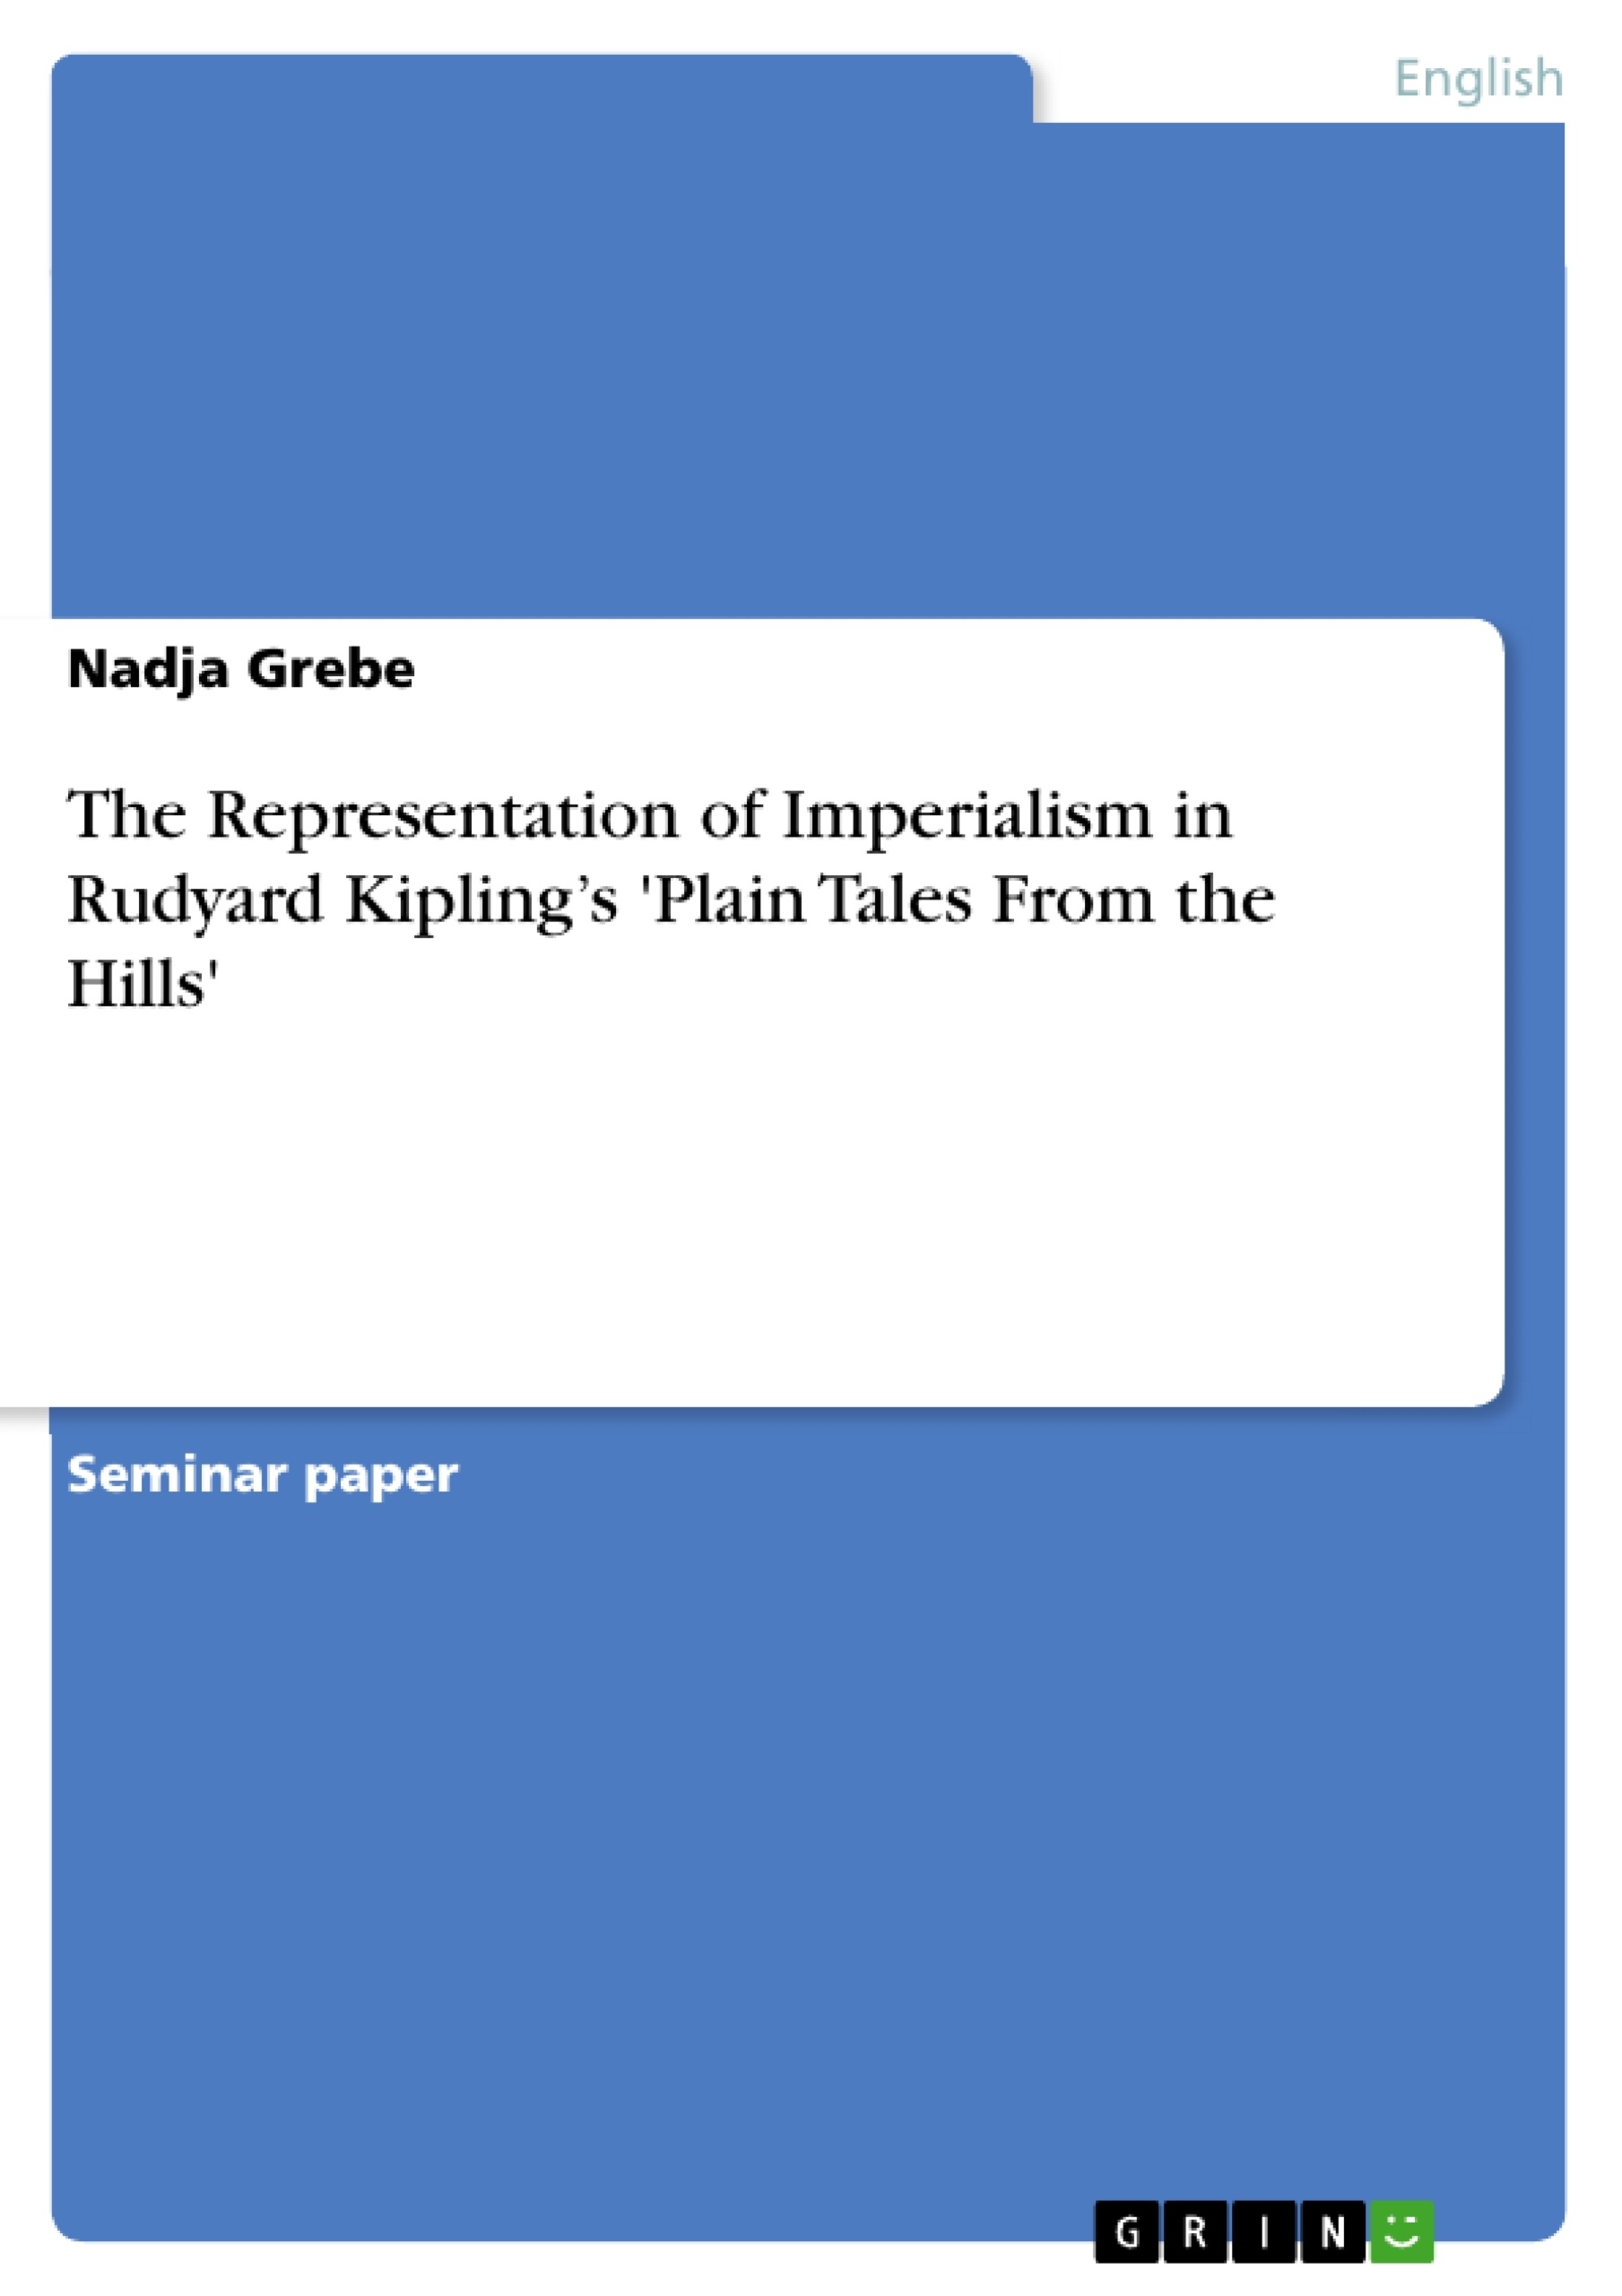 Title: The Representation of Imperialism in Rudyard Kipling’s 'Plain Tales From the Hills'